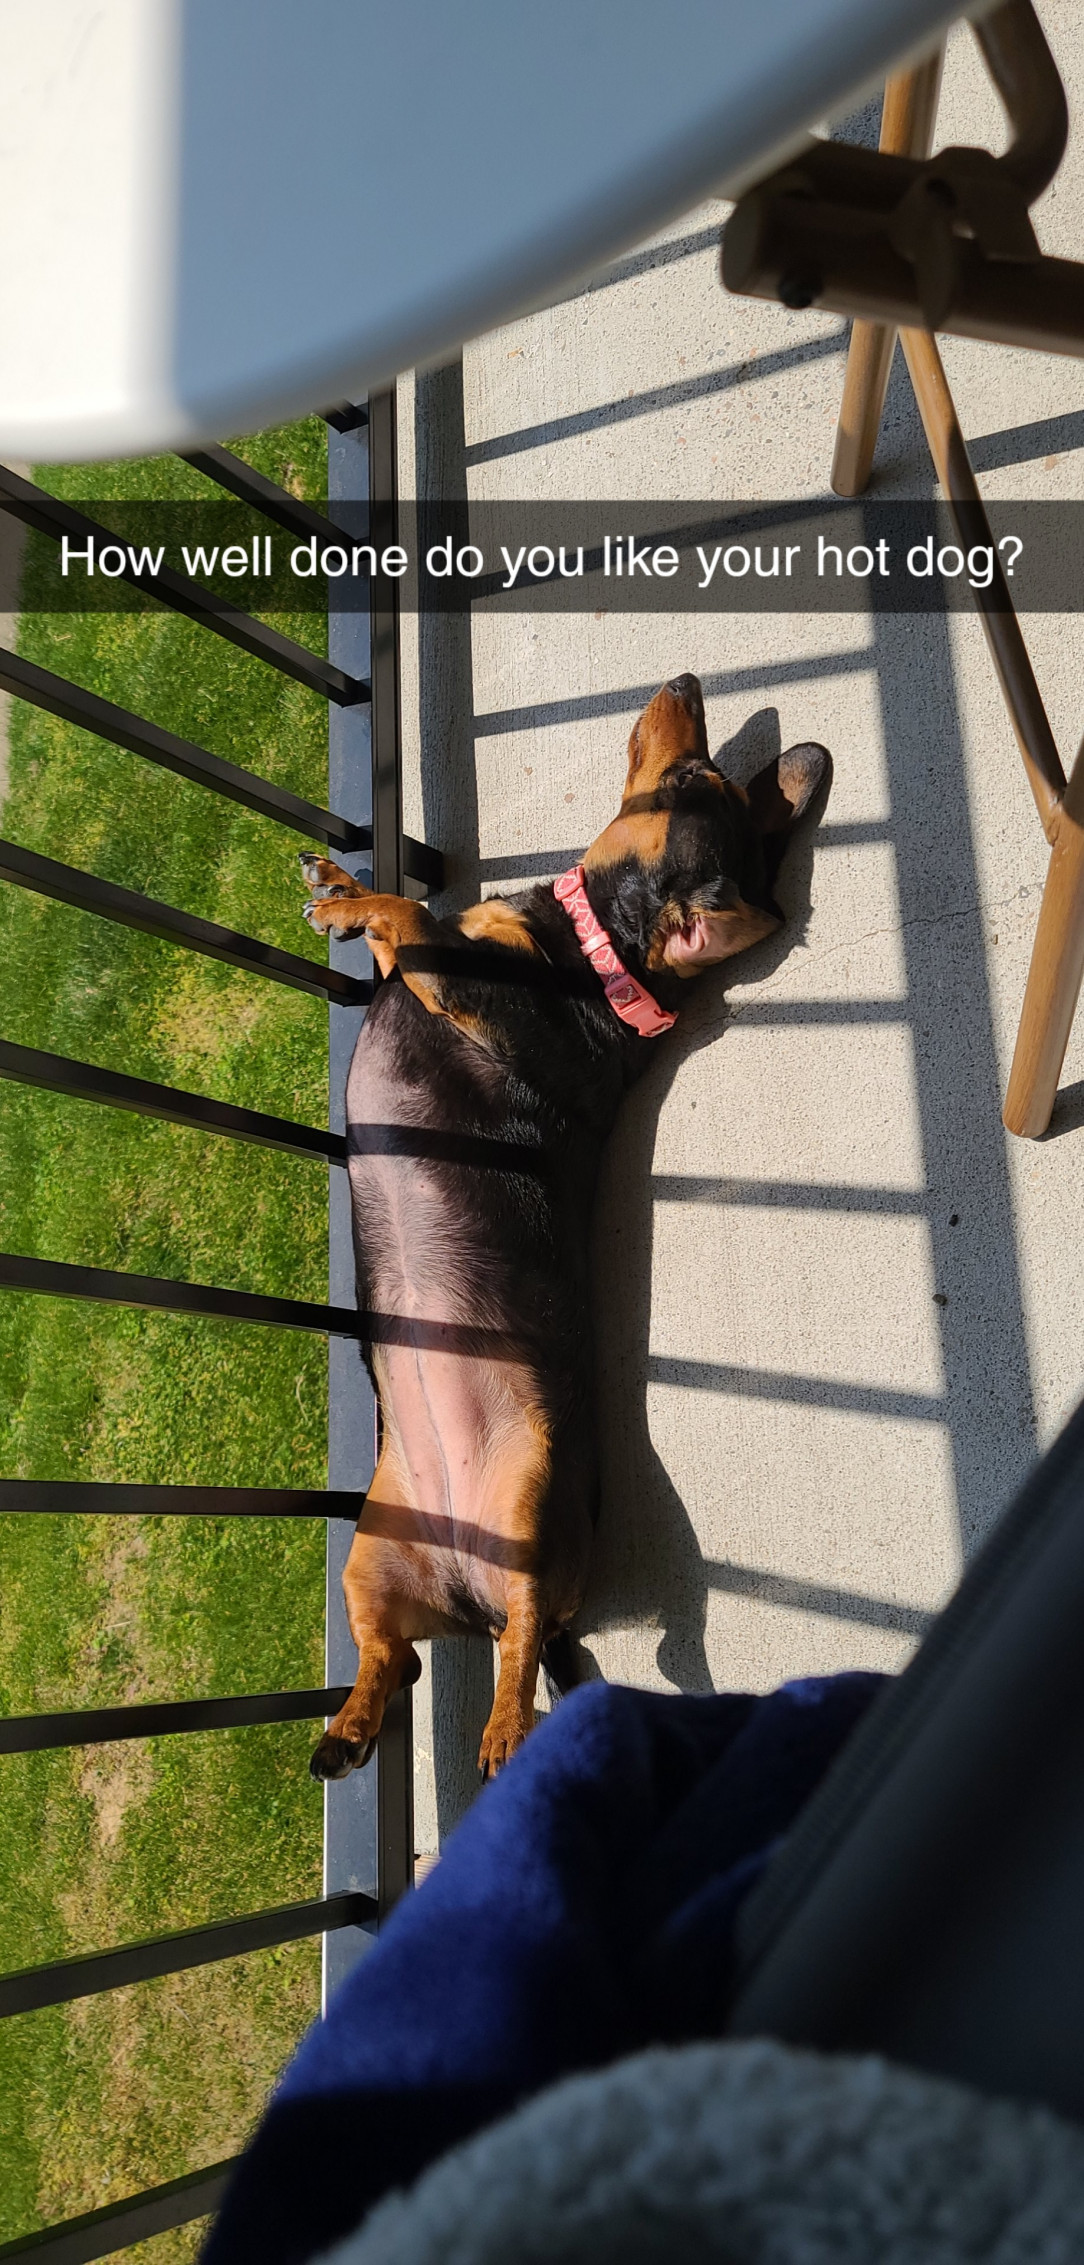 It&#039;s a nice day out and she loves to sunbathe